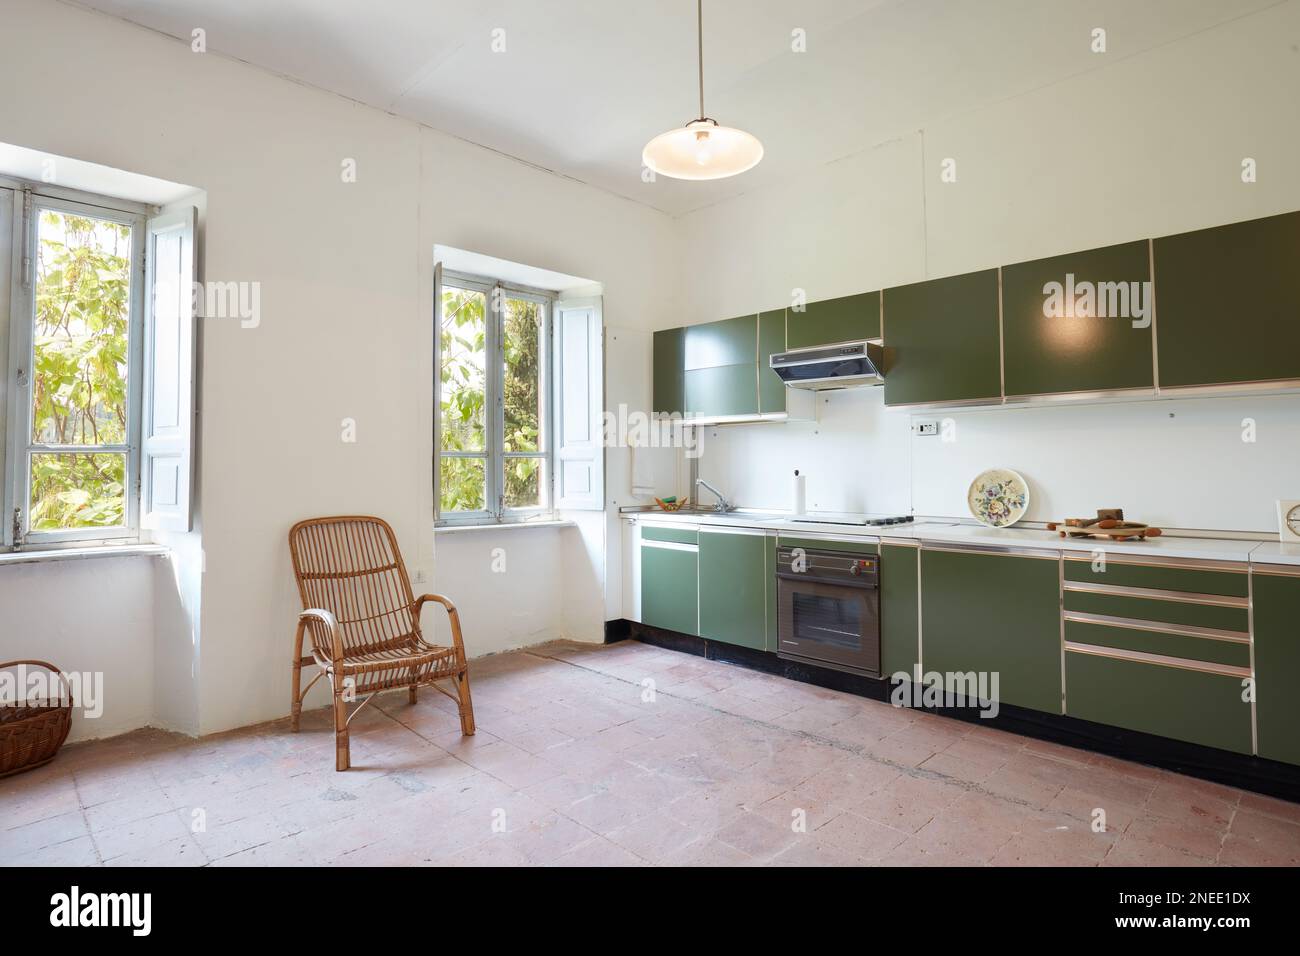 https://c8.alamy.com/comp/2NEE1DX/old-kitchen-in-apartment-interior-in-old-country-house-2NEE1DX.jpg